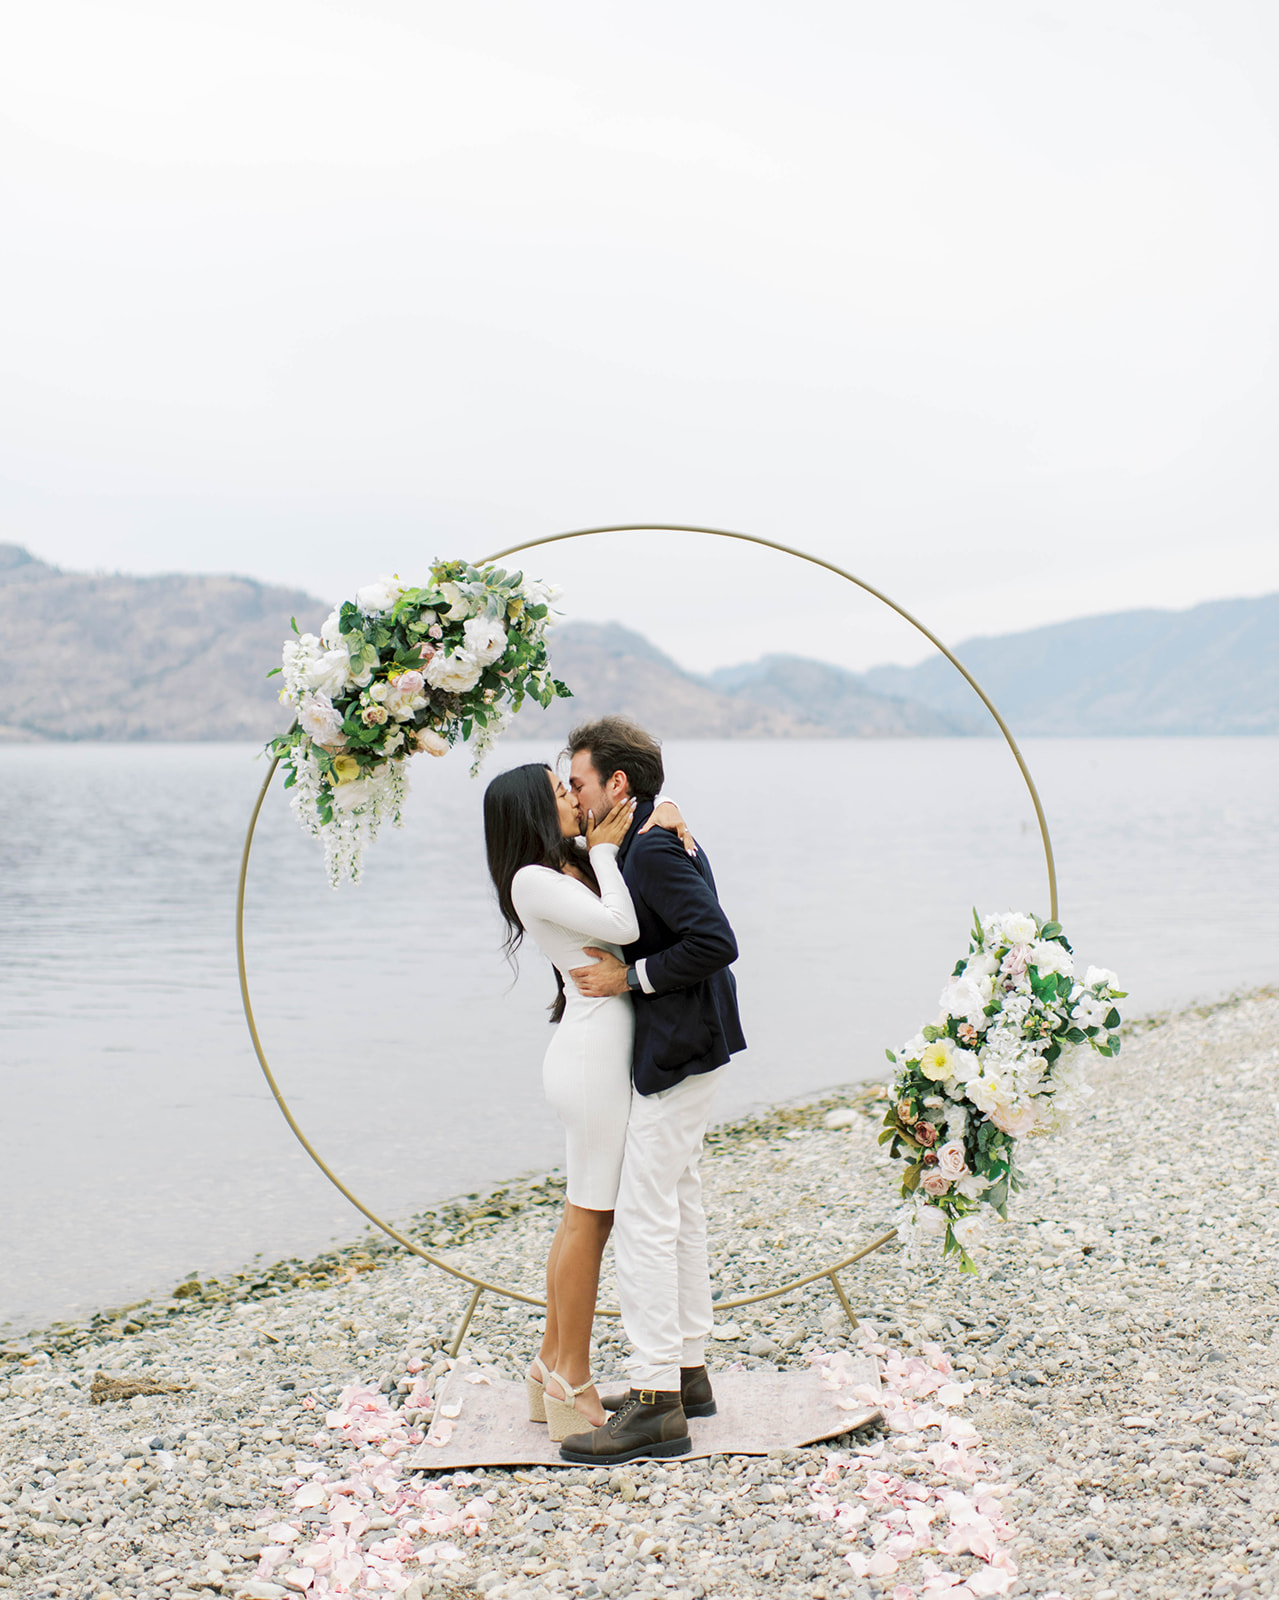 Perfectly Planned Romantic Proposal at Peachland Beach, in the Okanagan Valley, captured on film by Kelowna Wedding Photographer, Minted Photography. - romantic proposal inspiration, romantic proposal ideas